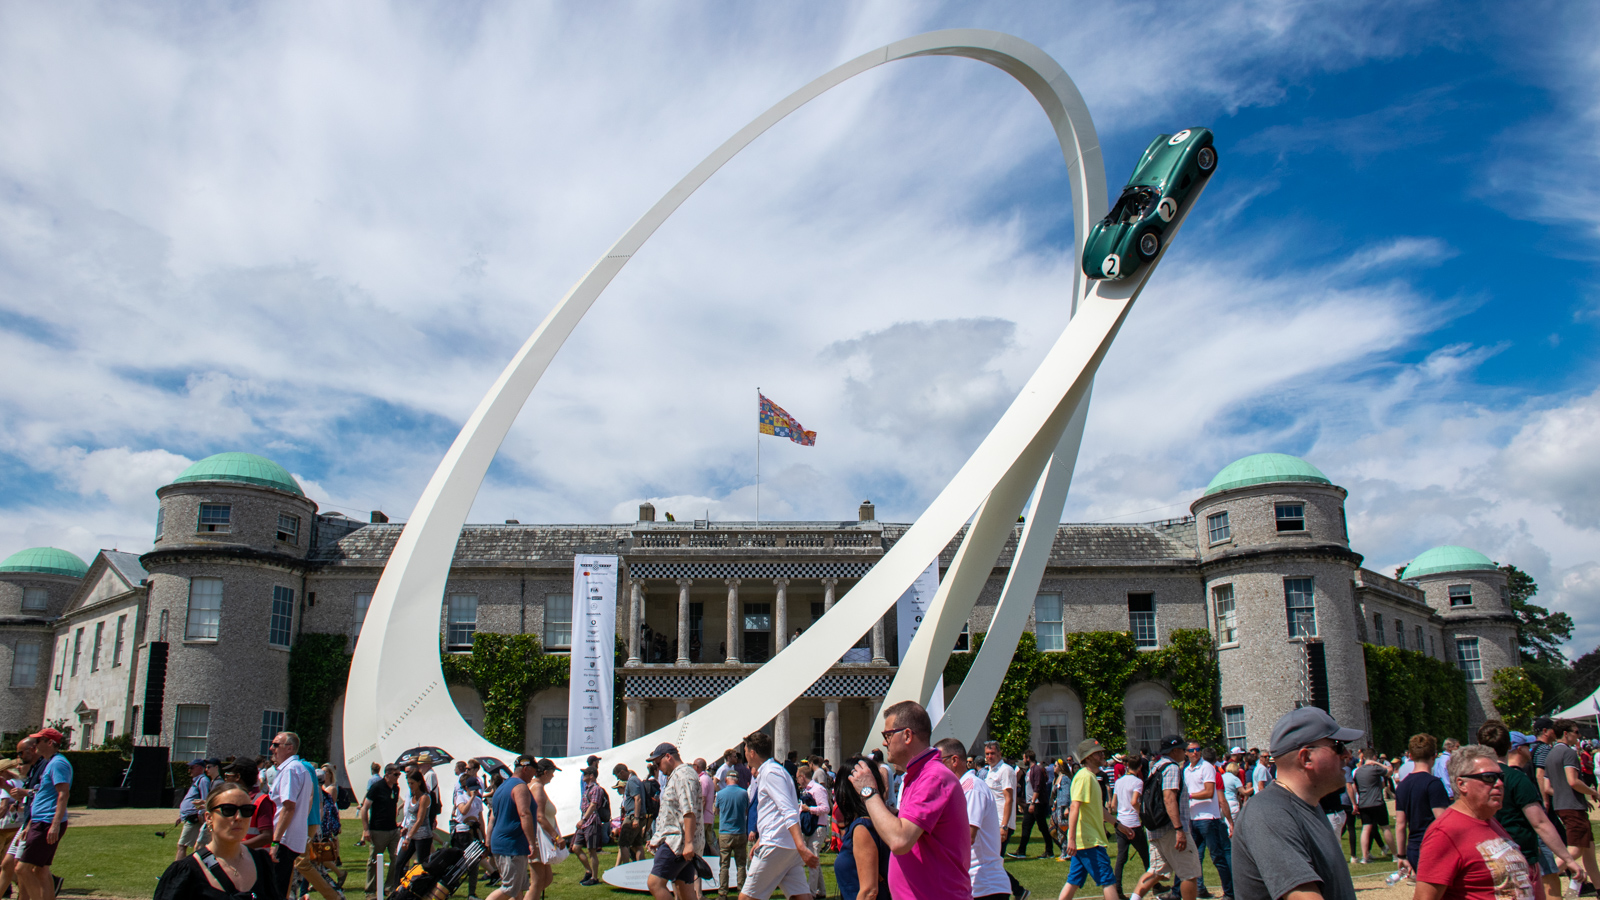 Event: Goodwood Festival of Speed